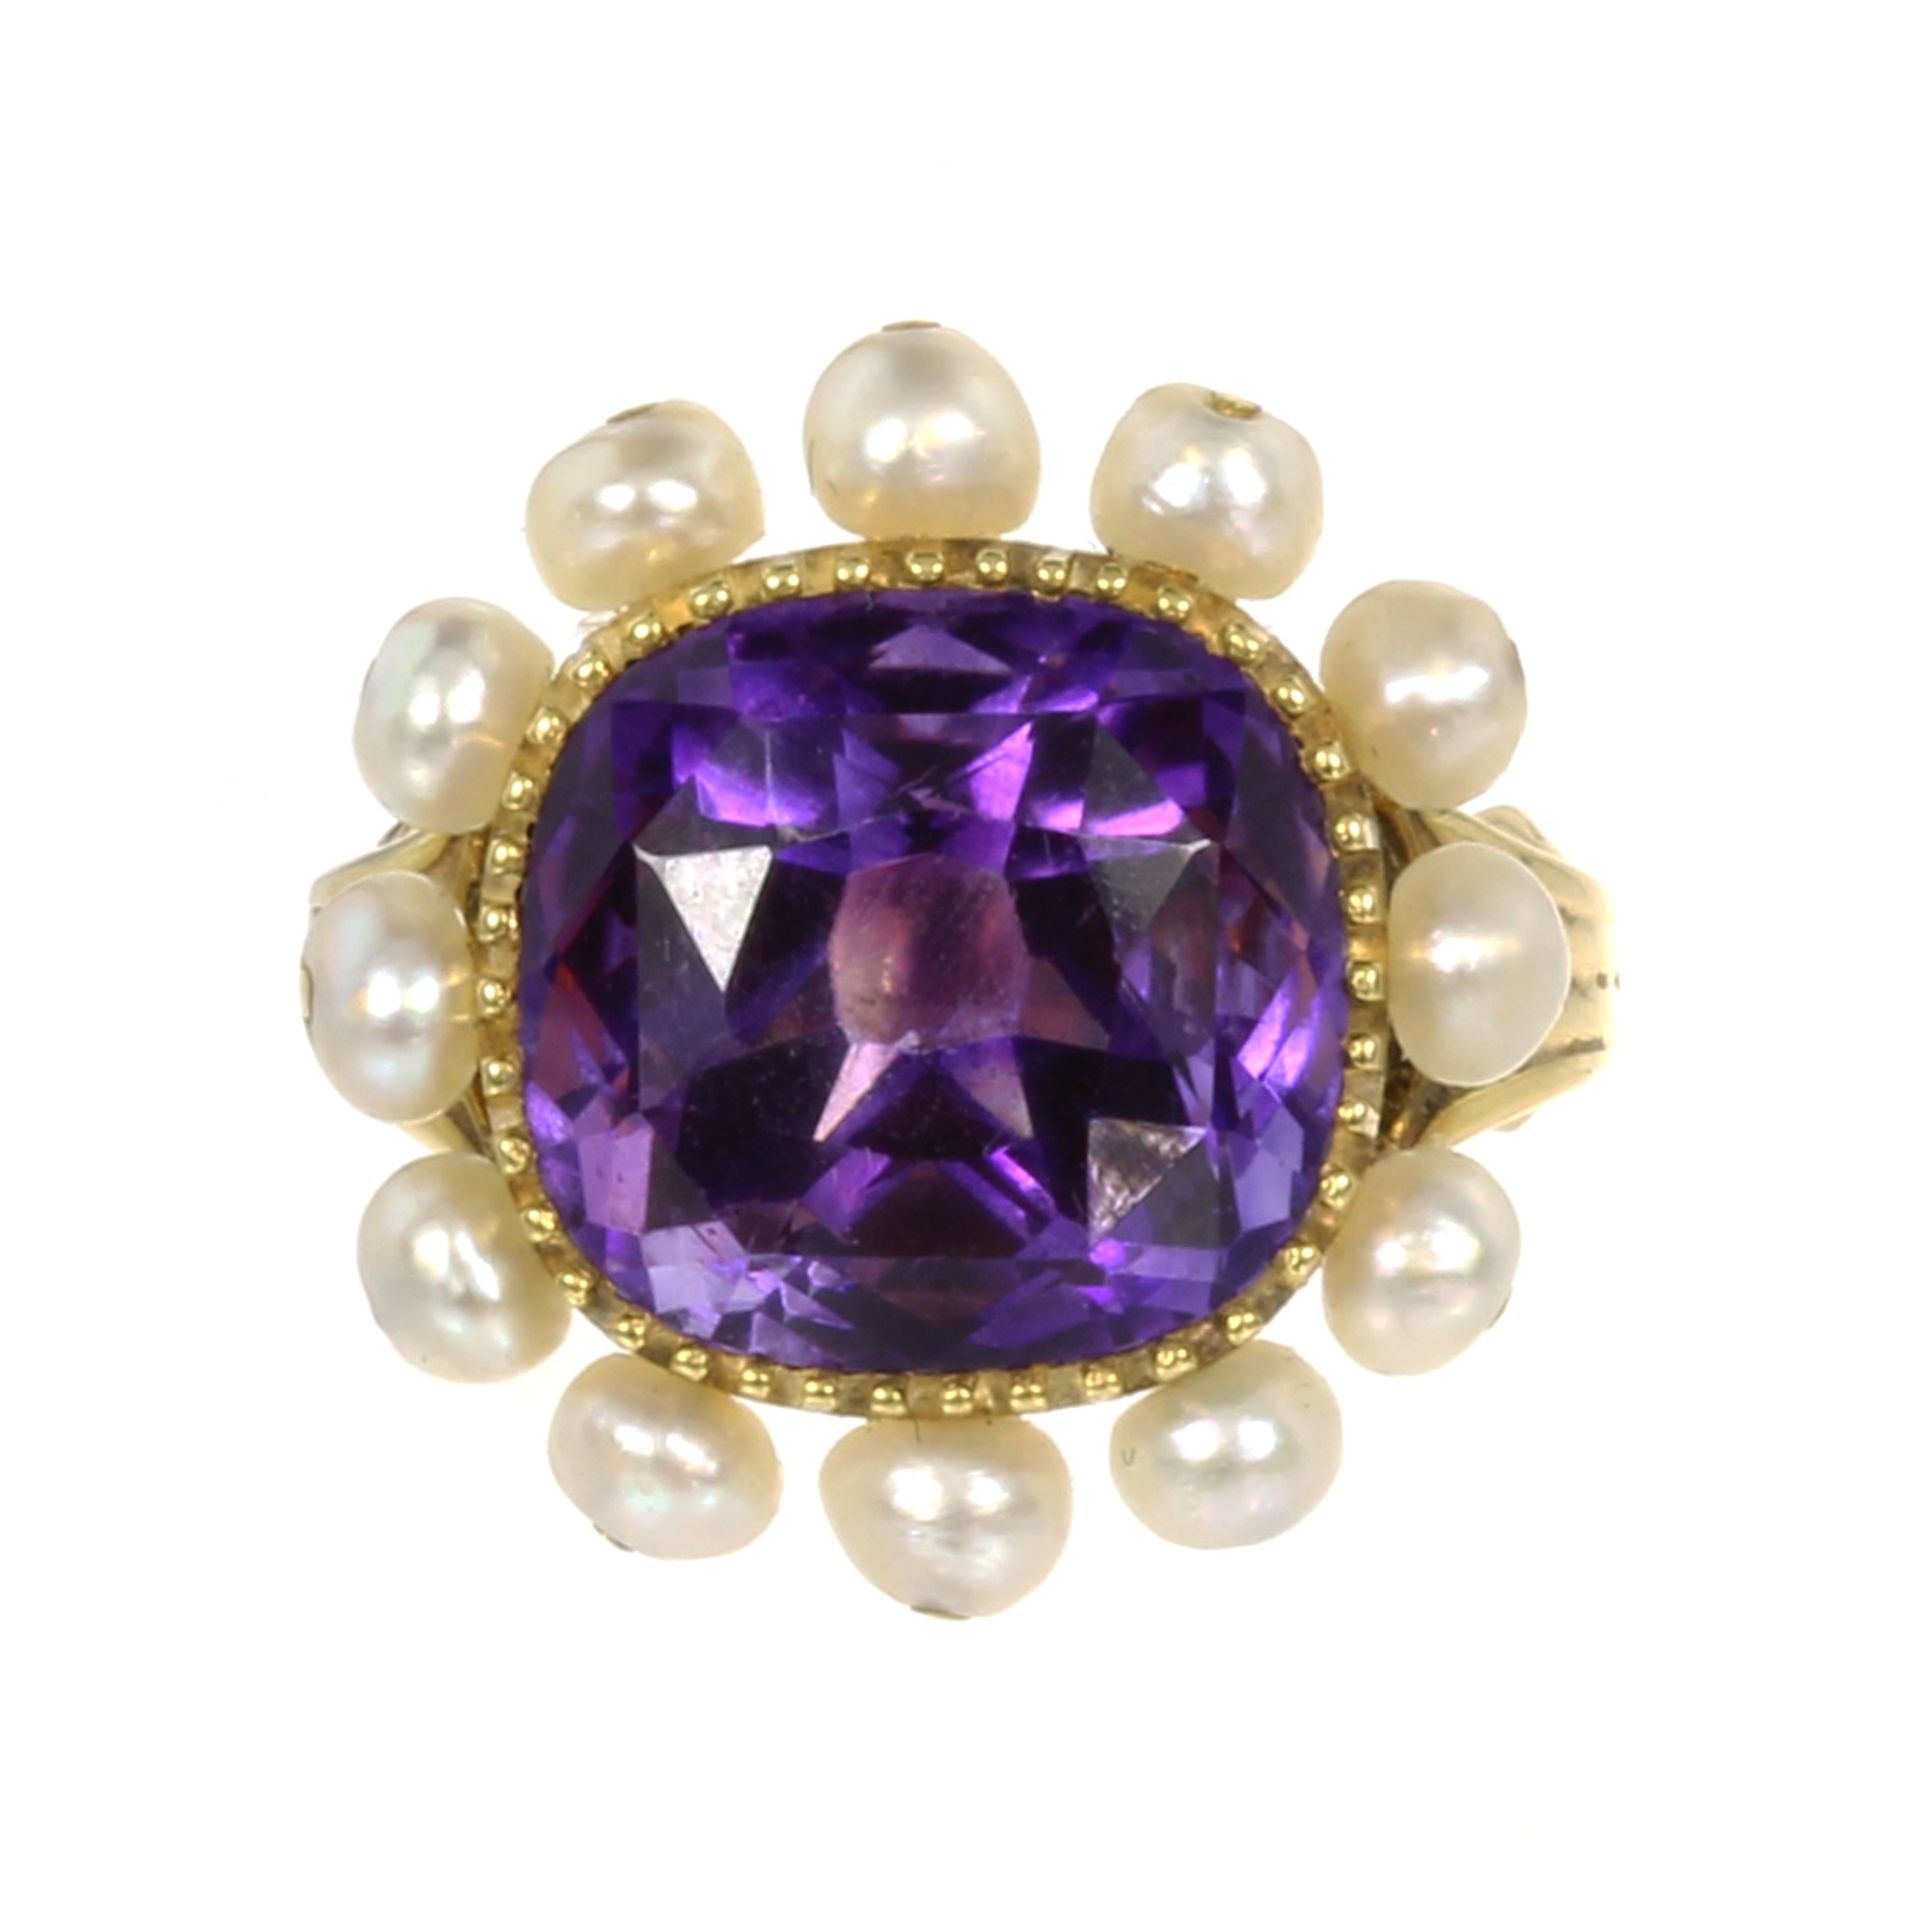 AN AMETHYST AND PEARL DRESS RING set with a central cushion cut amethyst of 8.37 carats within a